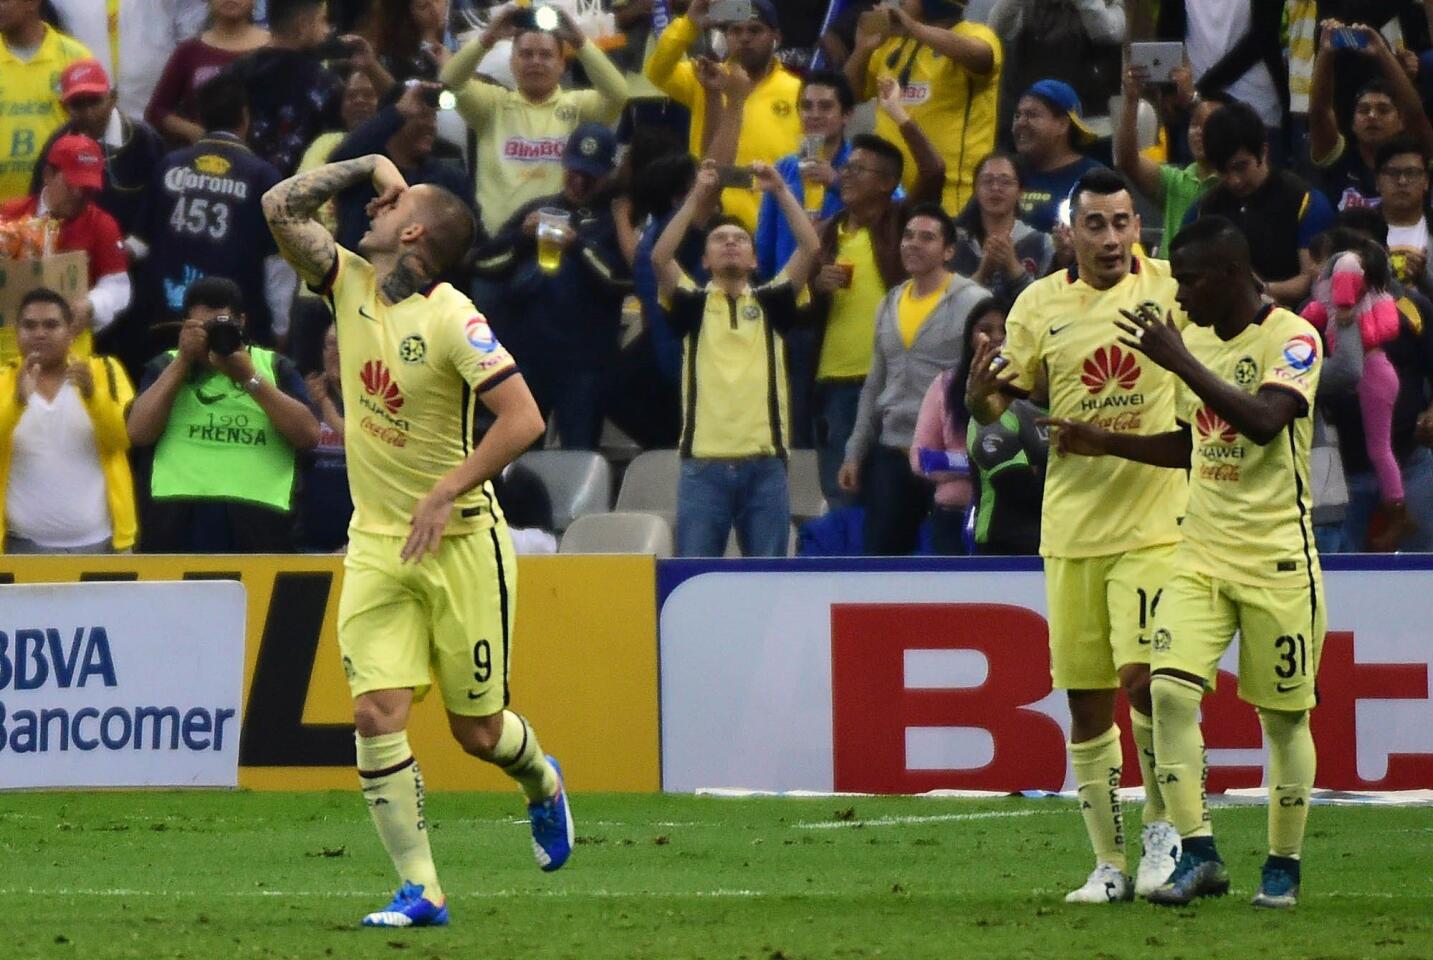 Dario Benedetto (L) of America celebrates his goal against Leon with his teammates during their Apertura Soccer 2015 tournament match at the Aztec Stadium in Mexico City on November 25, 2015.